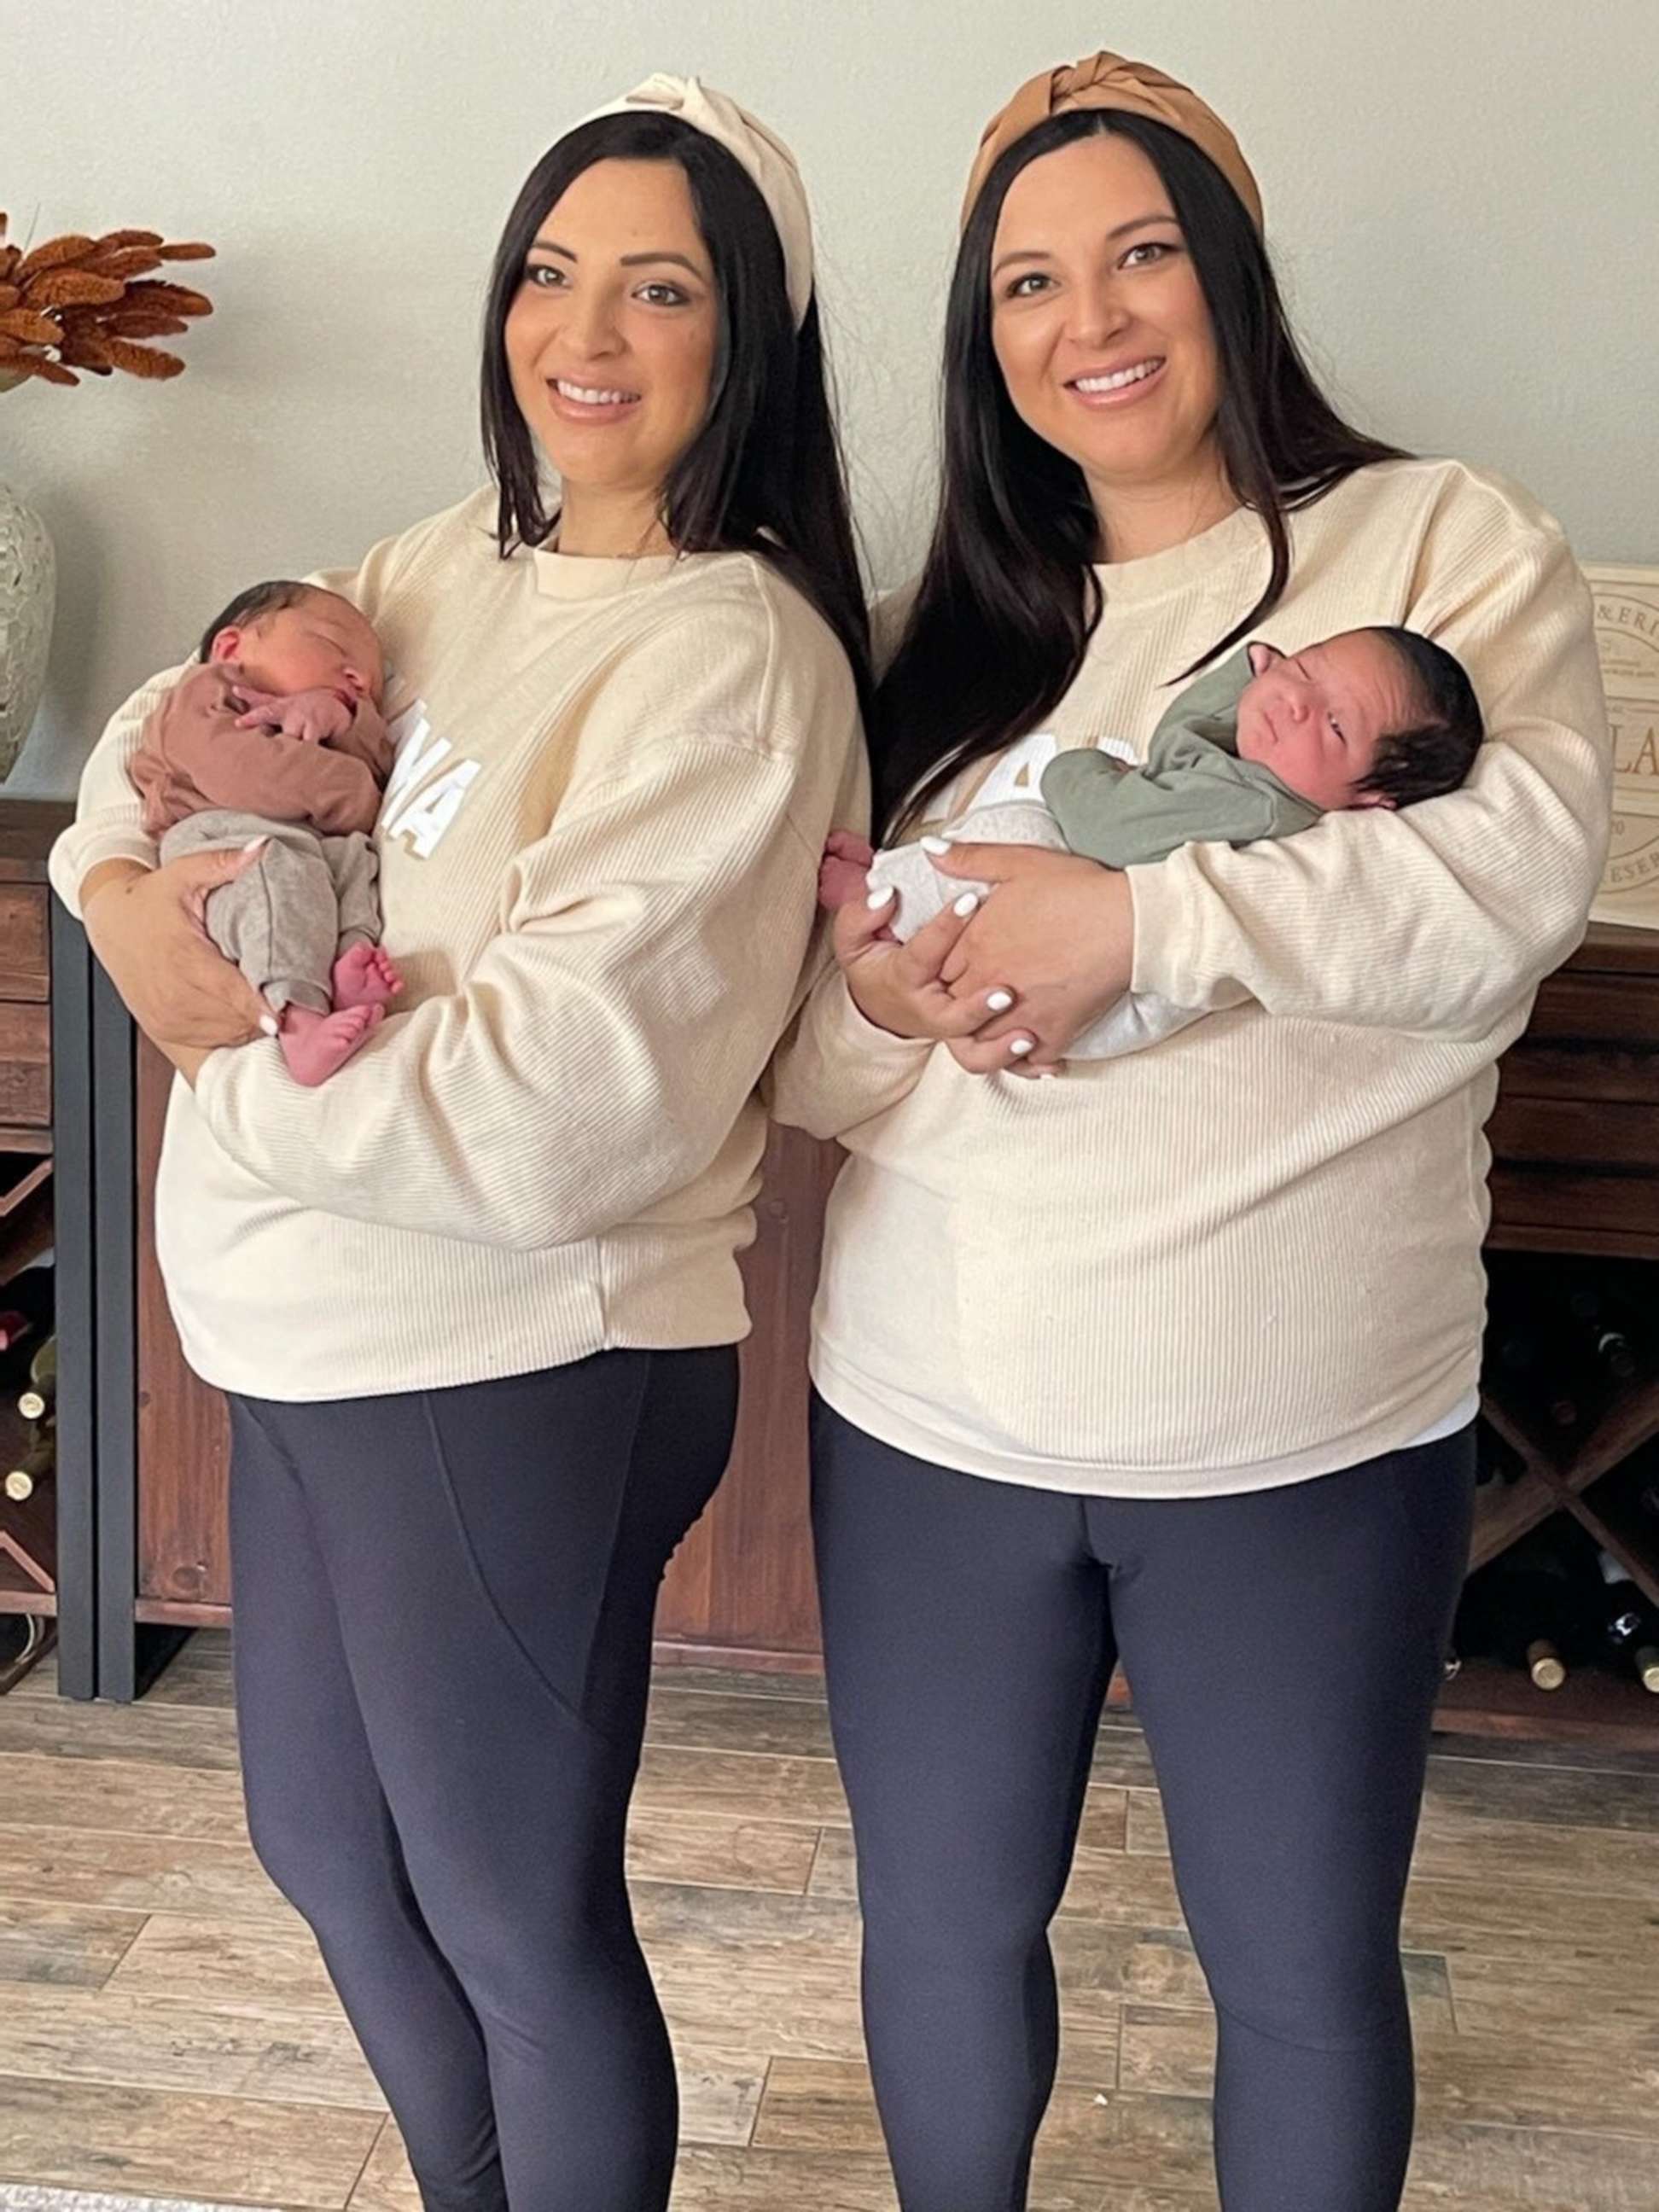 PHOTO: Erin Cheplak, left, holding her son, Silas, poses next to her twin sister, Jill Justiniani, holding her son, Oliver.